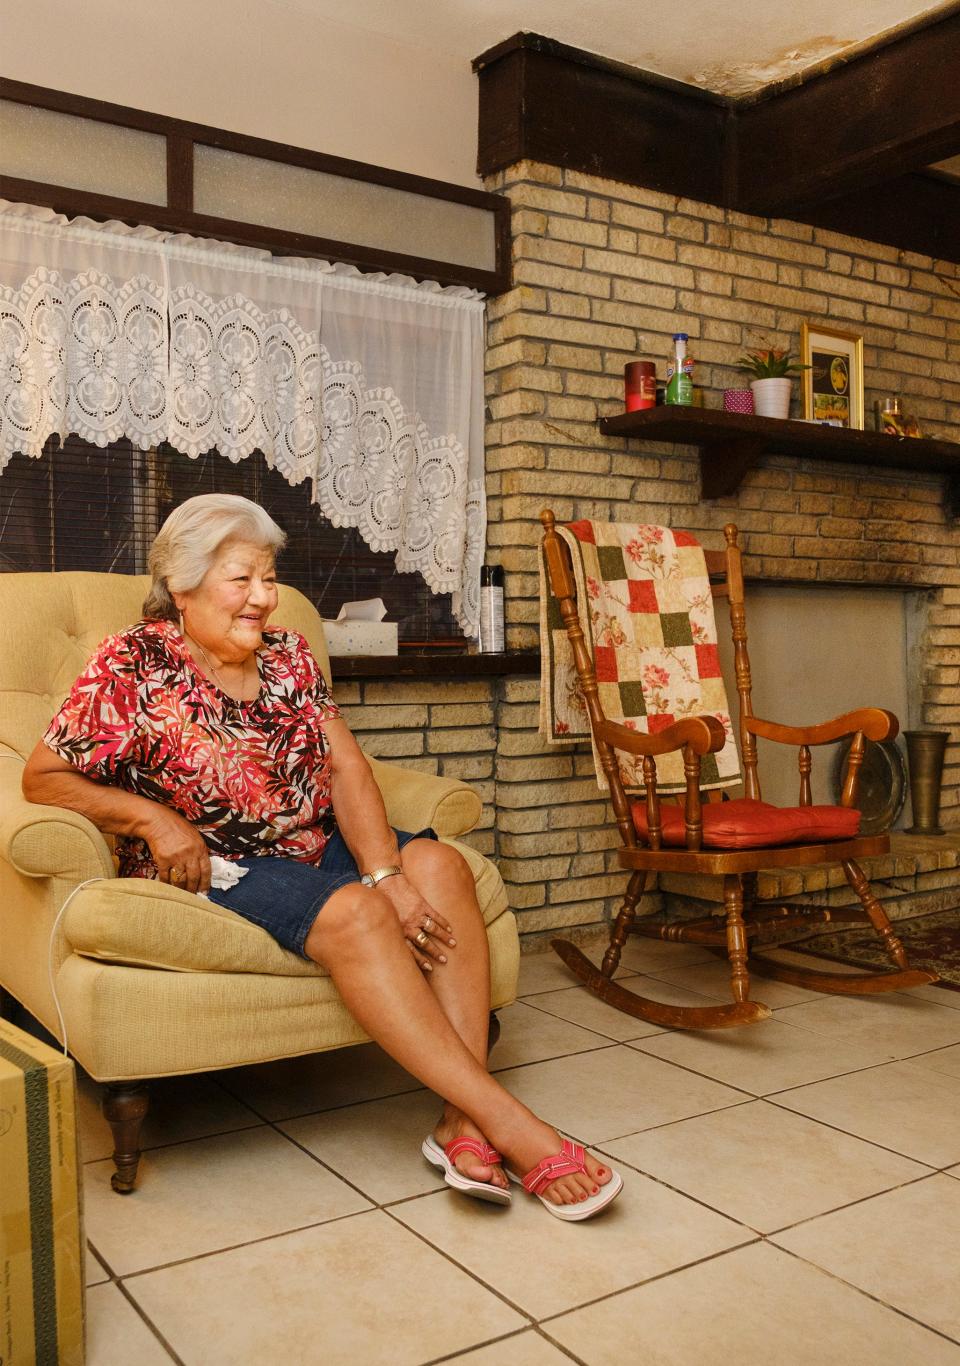 Olivia R. Hernandez sits in her favorite chair. The ceiling behind her shows damage from a leaking roof.